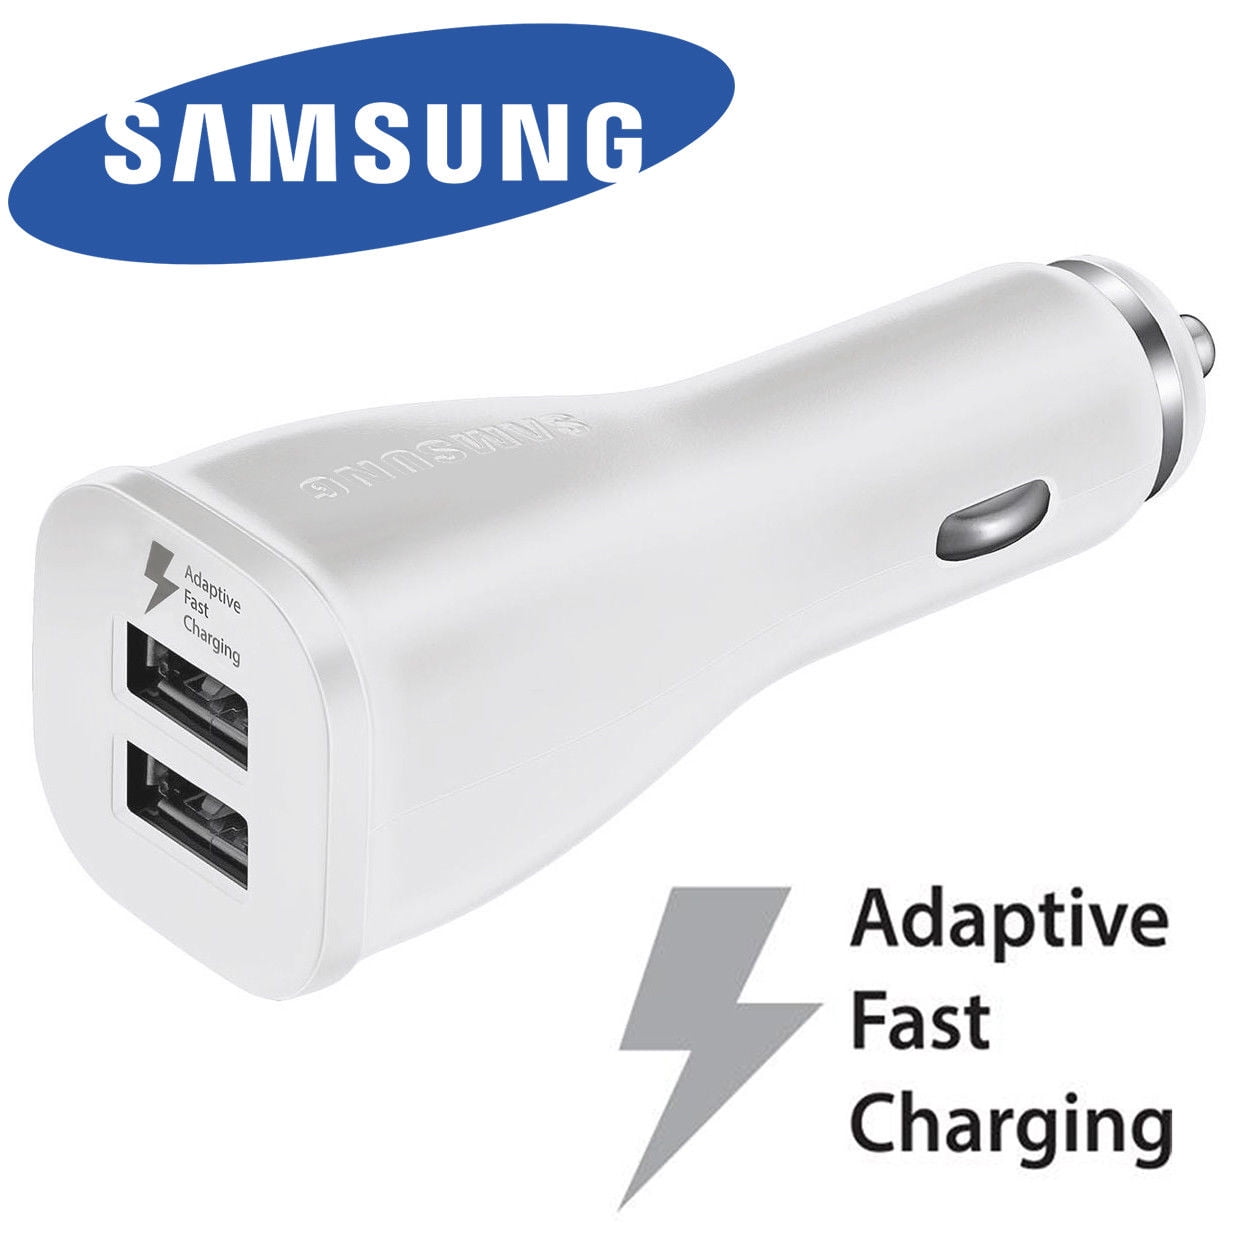 Blue Galaxy S9 S8 S7 S6 Edge Elegant Design Car Charger USB Dual Port Travel Fast Charging for All Devices iPhone X XS XS Max 8 7 Plus 6S 6 5s 5 SE Designed in New York 